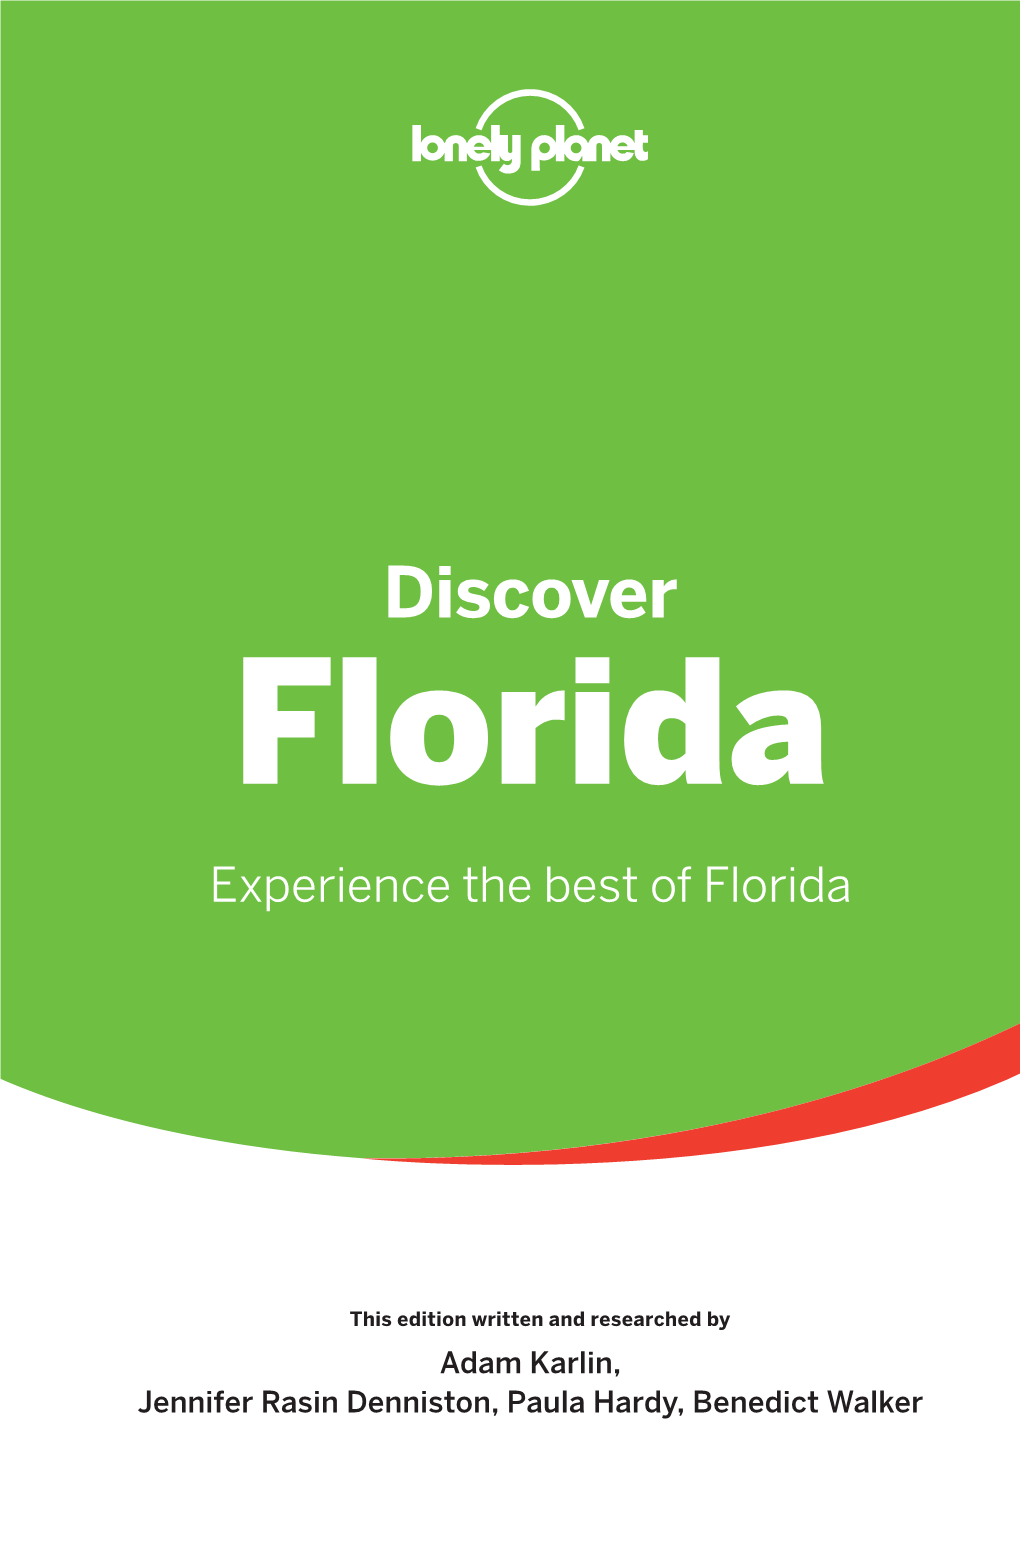 Florida Experience the Best of Florida